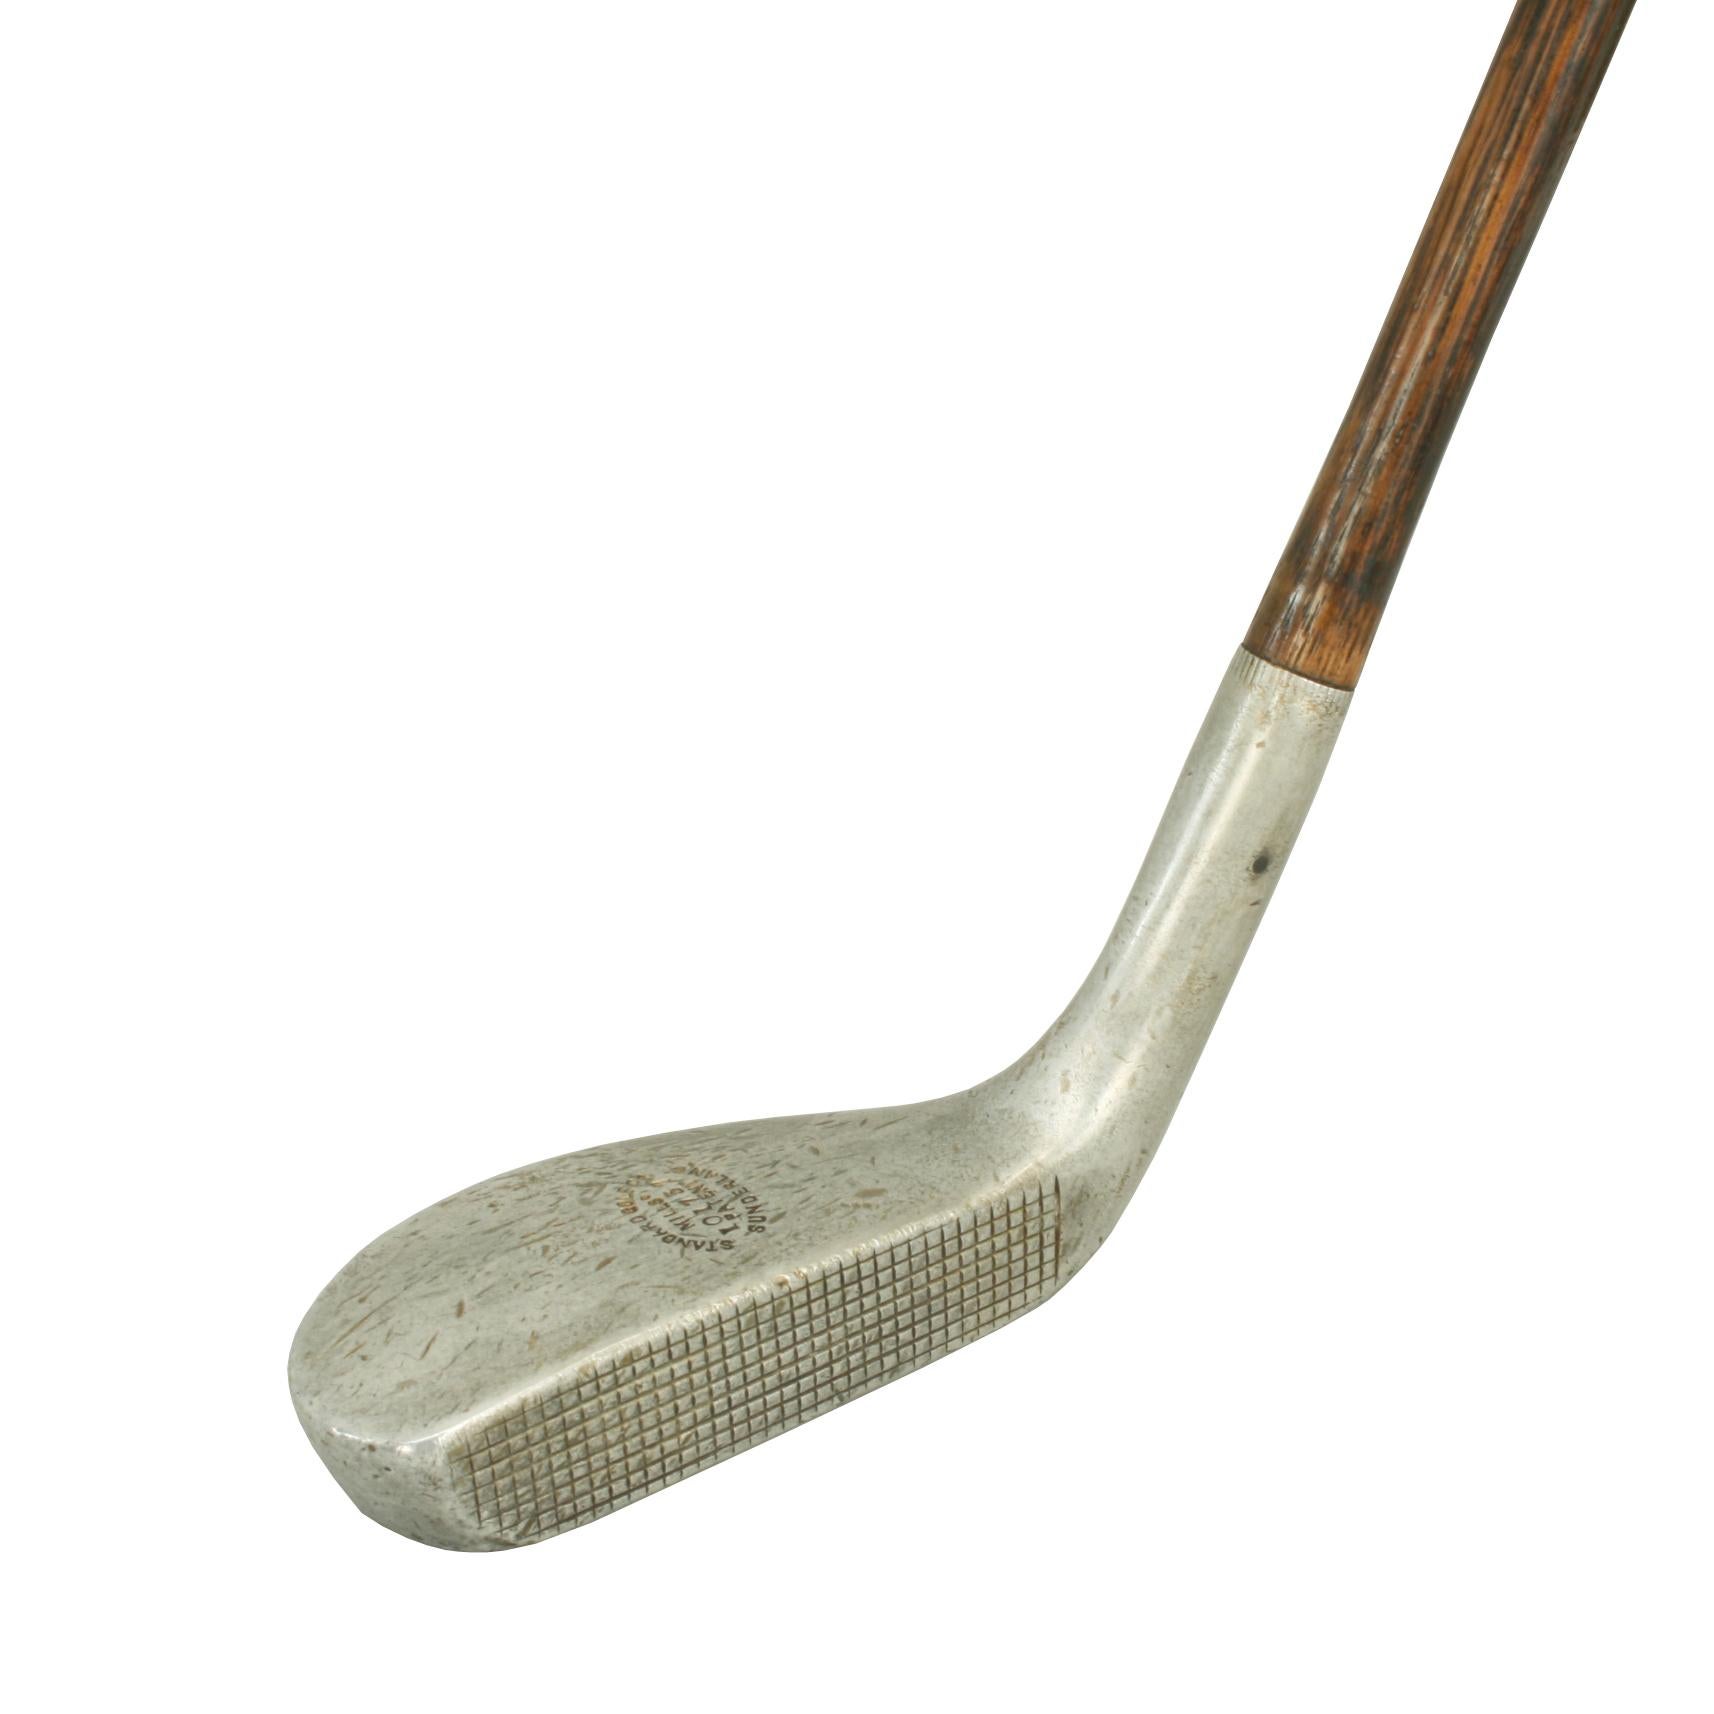 Vintage Hickory Golf Club, Braid Mills Long Nose Putter.
A good example of an aluminium Long Nose Braid Mills putter by the Standard Golf Co. The top of the head is stamped 'STANDARD GOLF Co., MILLS' 101757, PATENT, SUNDERLAND', whilst the